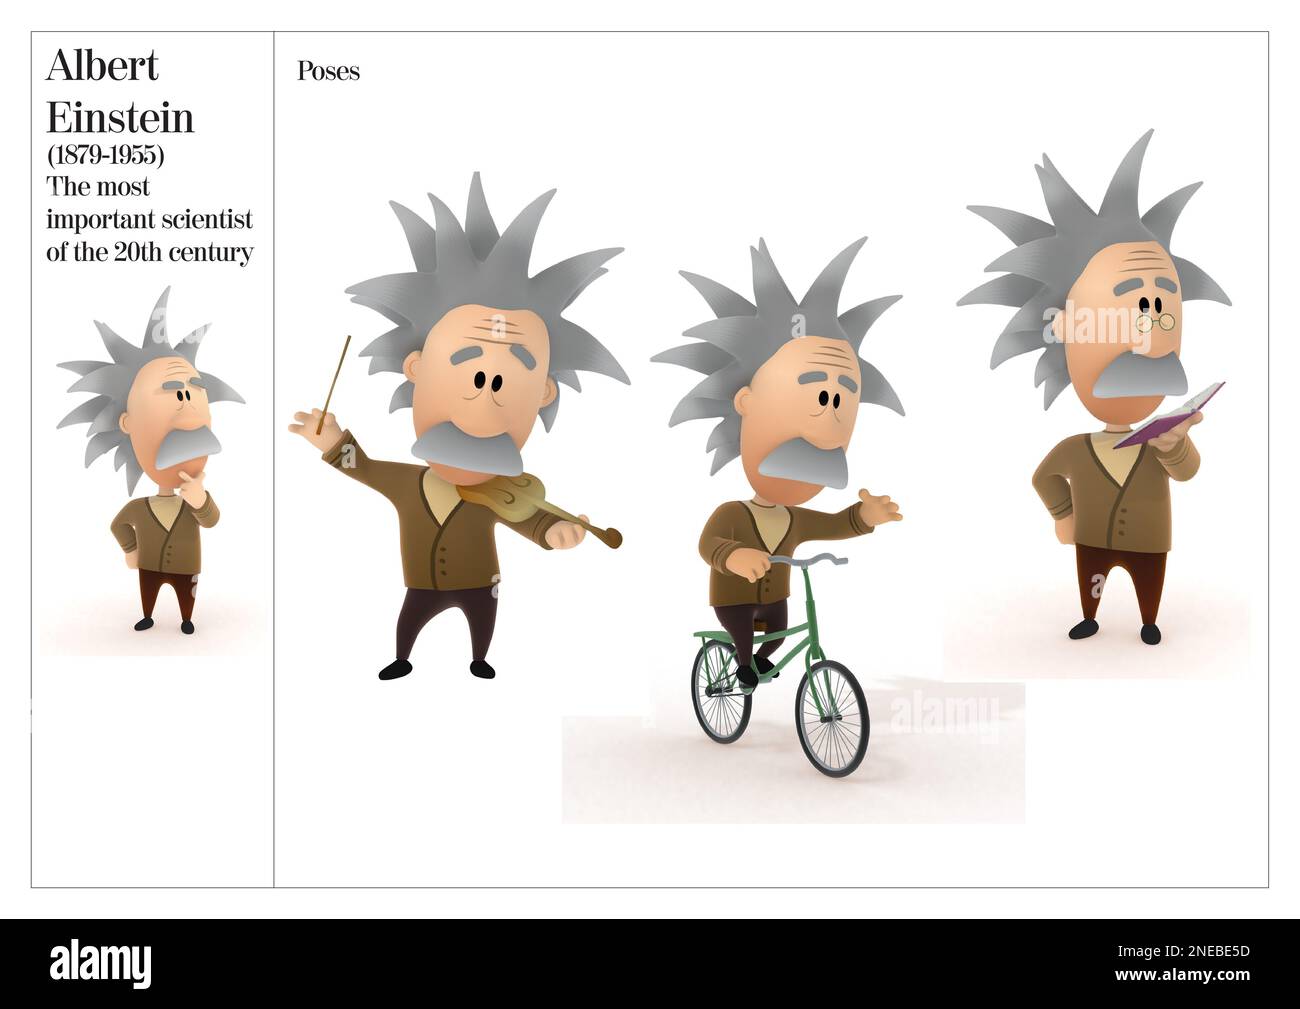 Postural pictures of Albert Einstein, the most important scientist of the 20th century, (1879-1955). [Adobe InDesign (.indd)]. Stock Photo